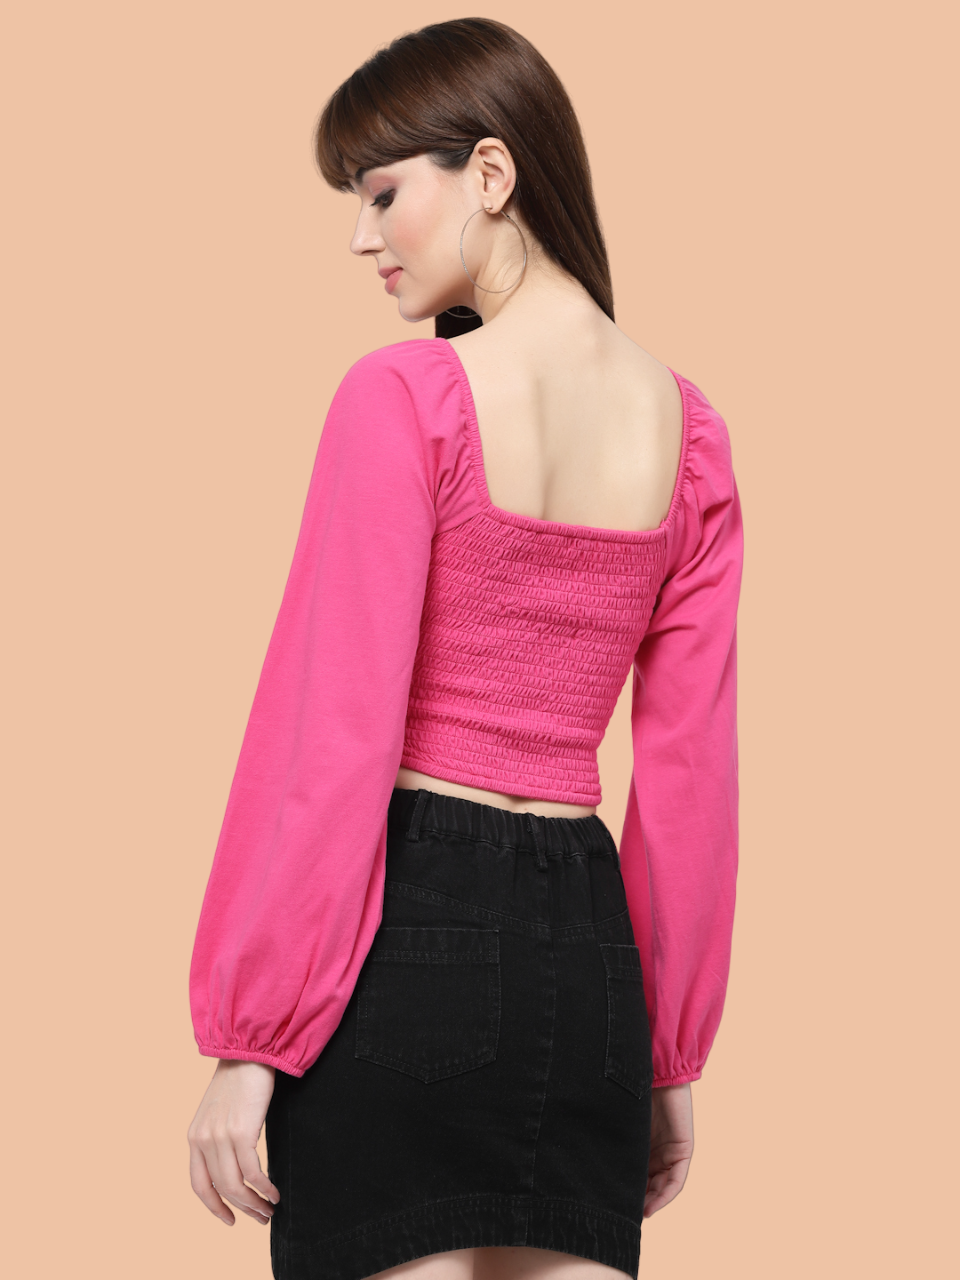 Flawless Women Stylish Pink Crop Top | OVERLAP Being Flawless